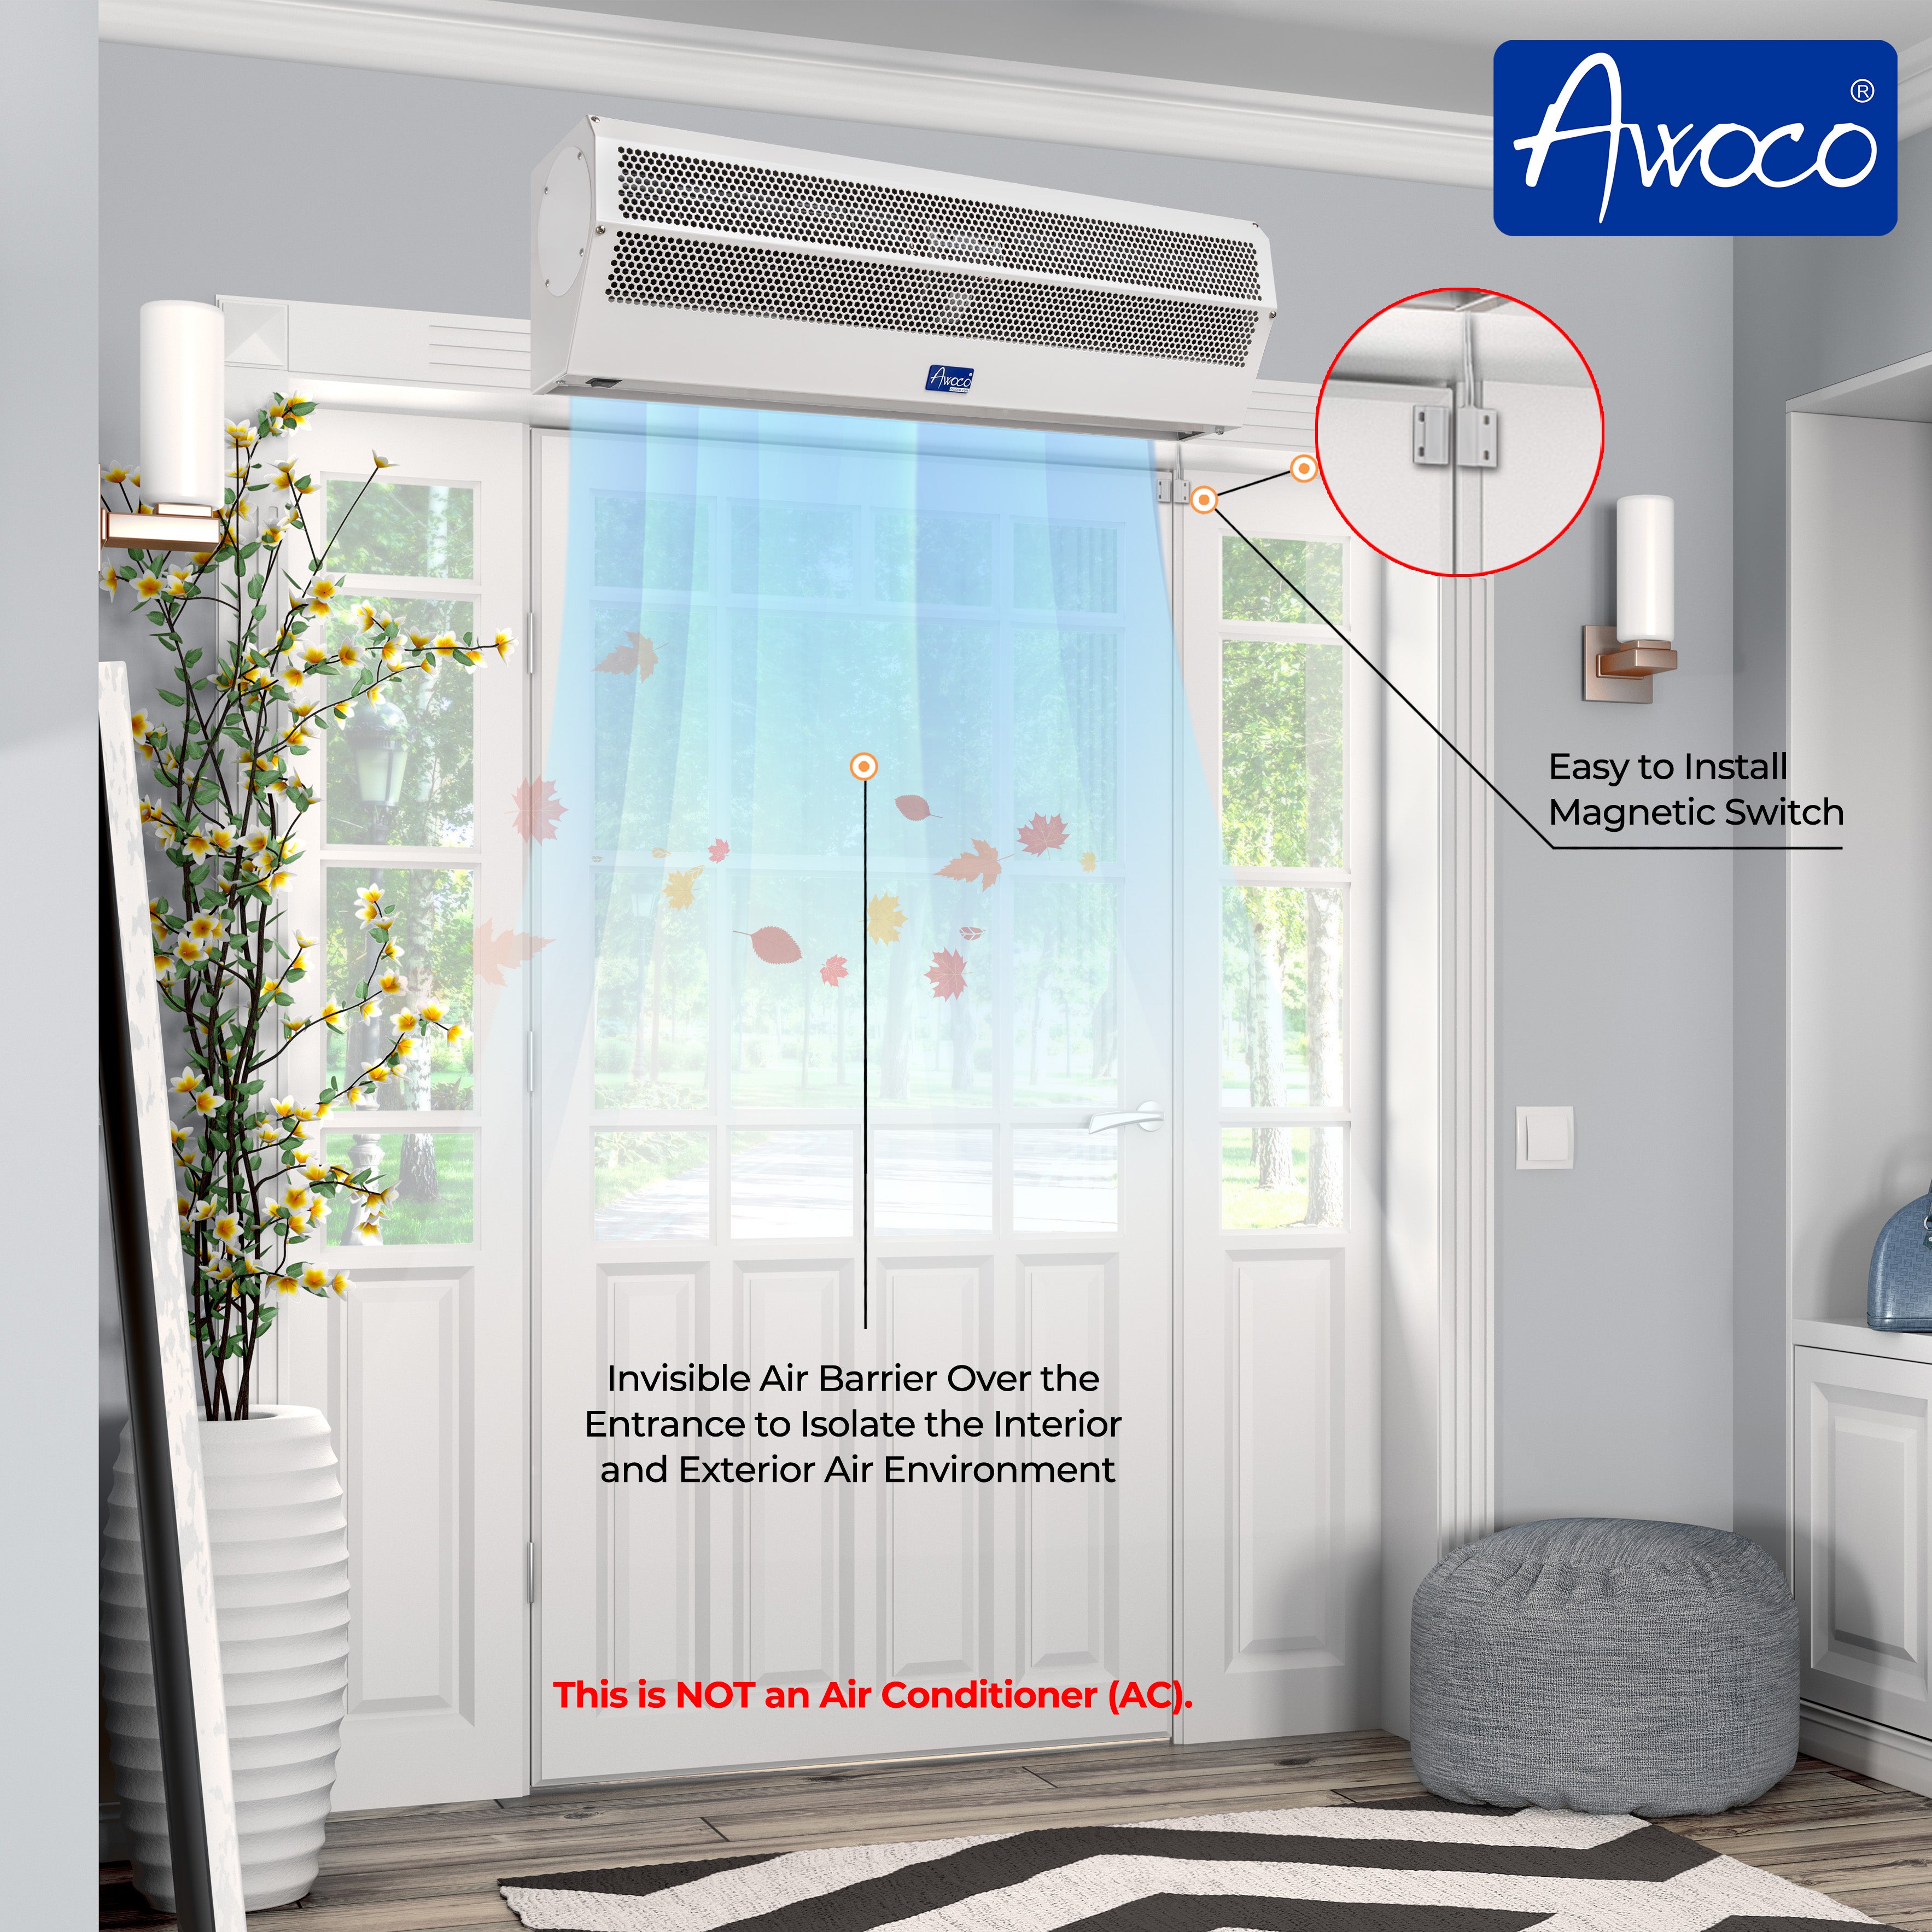 Awoco 48” Super Power 2 Speeds 1650 CFM Commercial Indoor Air Curtain, UL Certified, 120V Unheated with Shutoff Delay Magnetic Switch for Swinging Doors